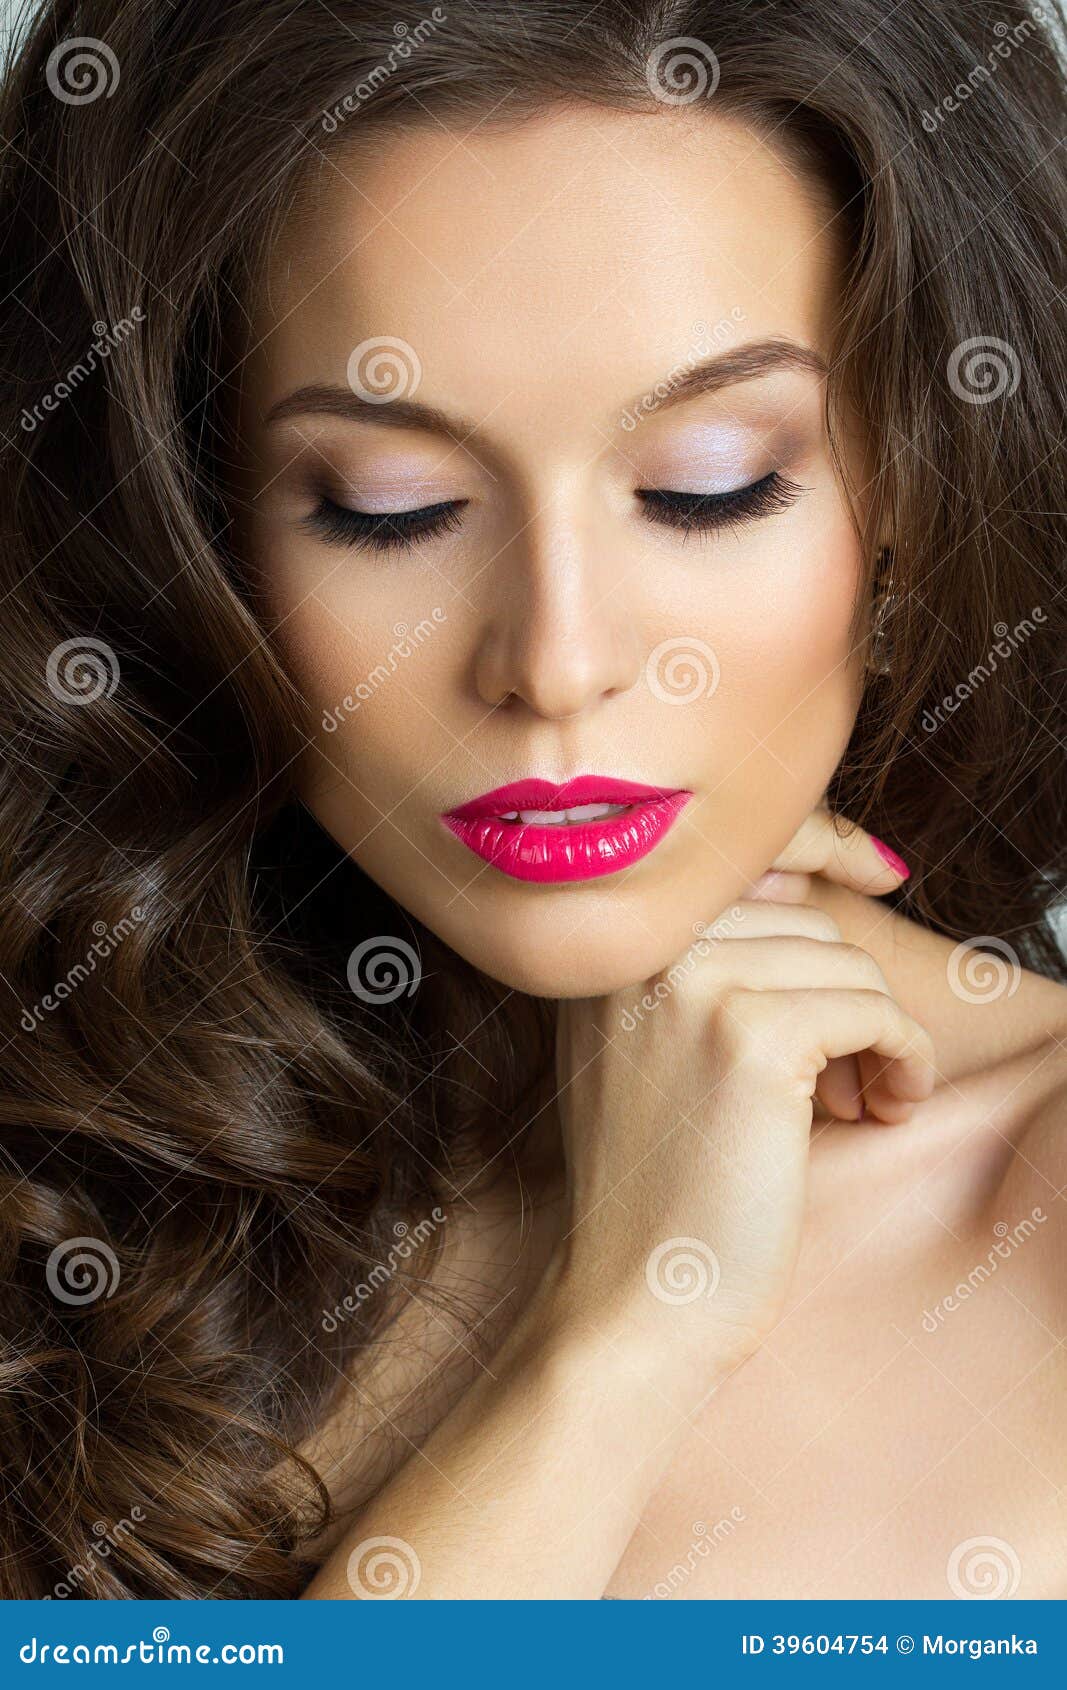 Beautiful Woman with Long Brown Hair Stock Photo - Image of long ...